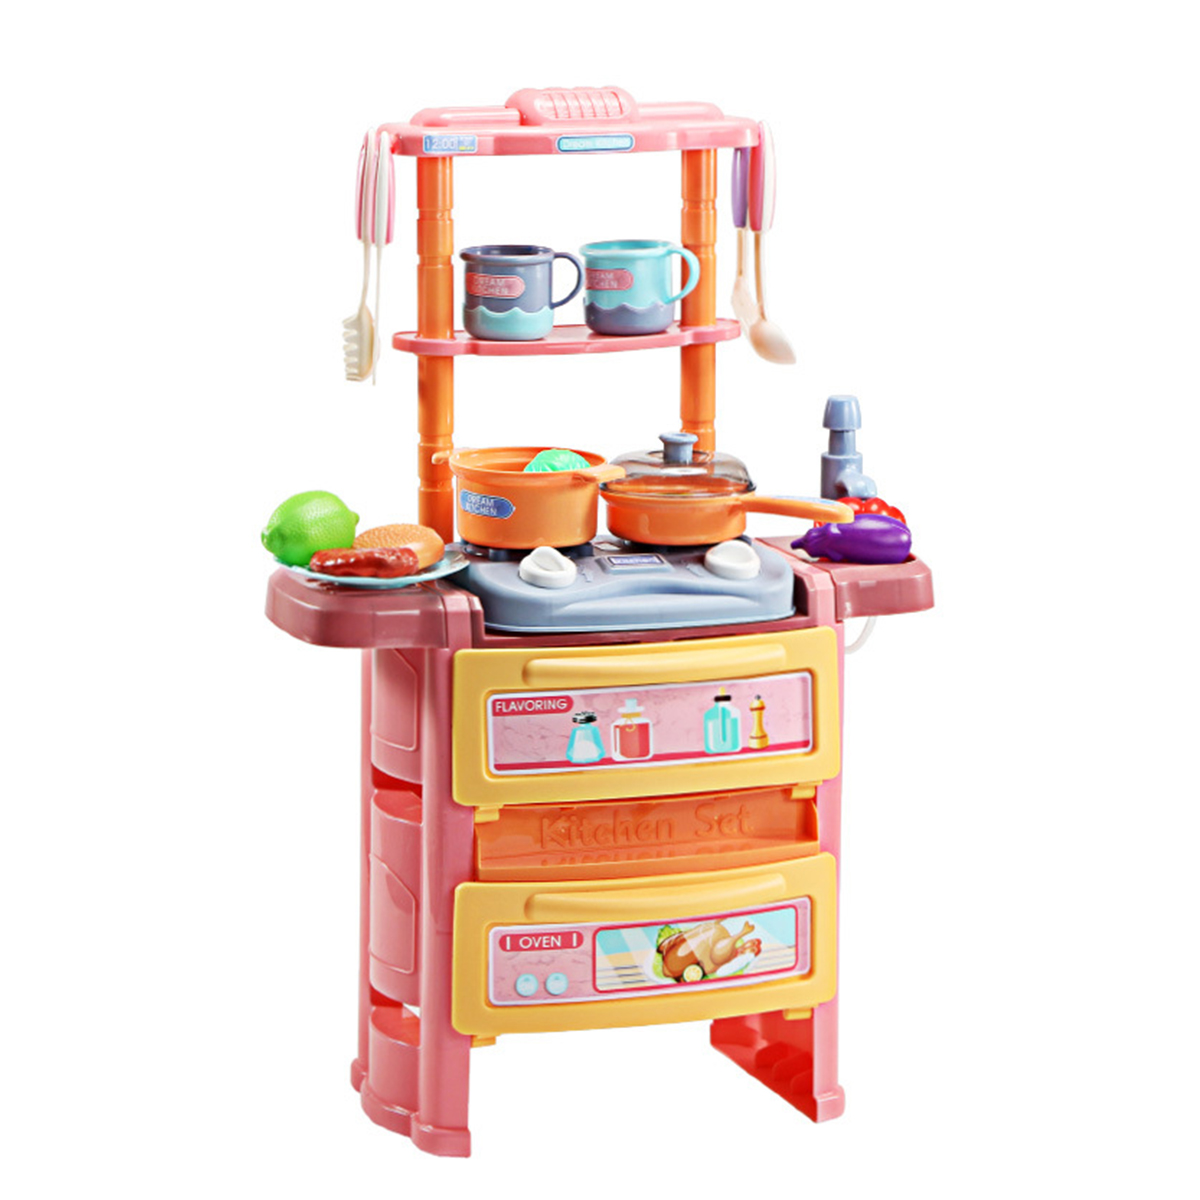 Dream-Kitchen-Role-Play-Cooking-Children-Tableware-Toys-Set-with-Sound-Light-Water-Outlet-Funtion-1678214-4